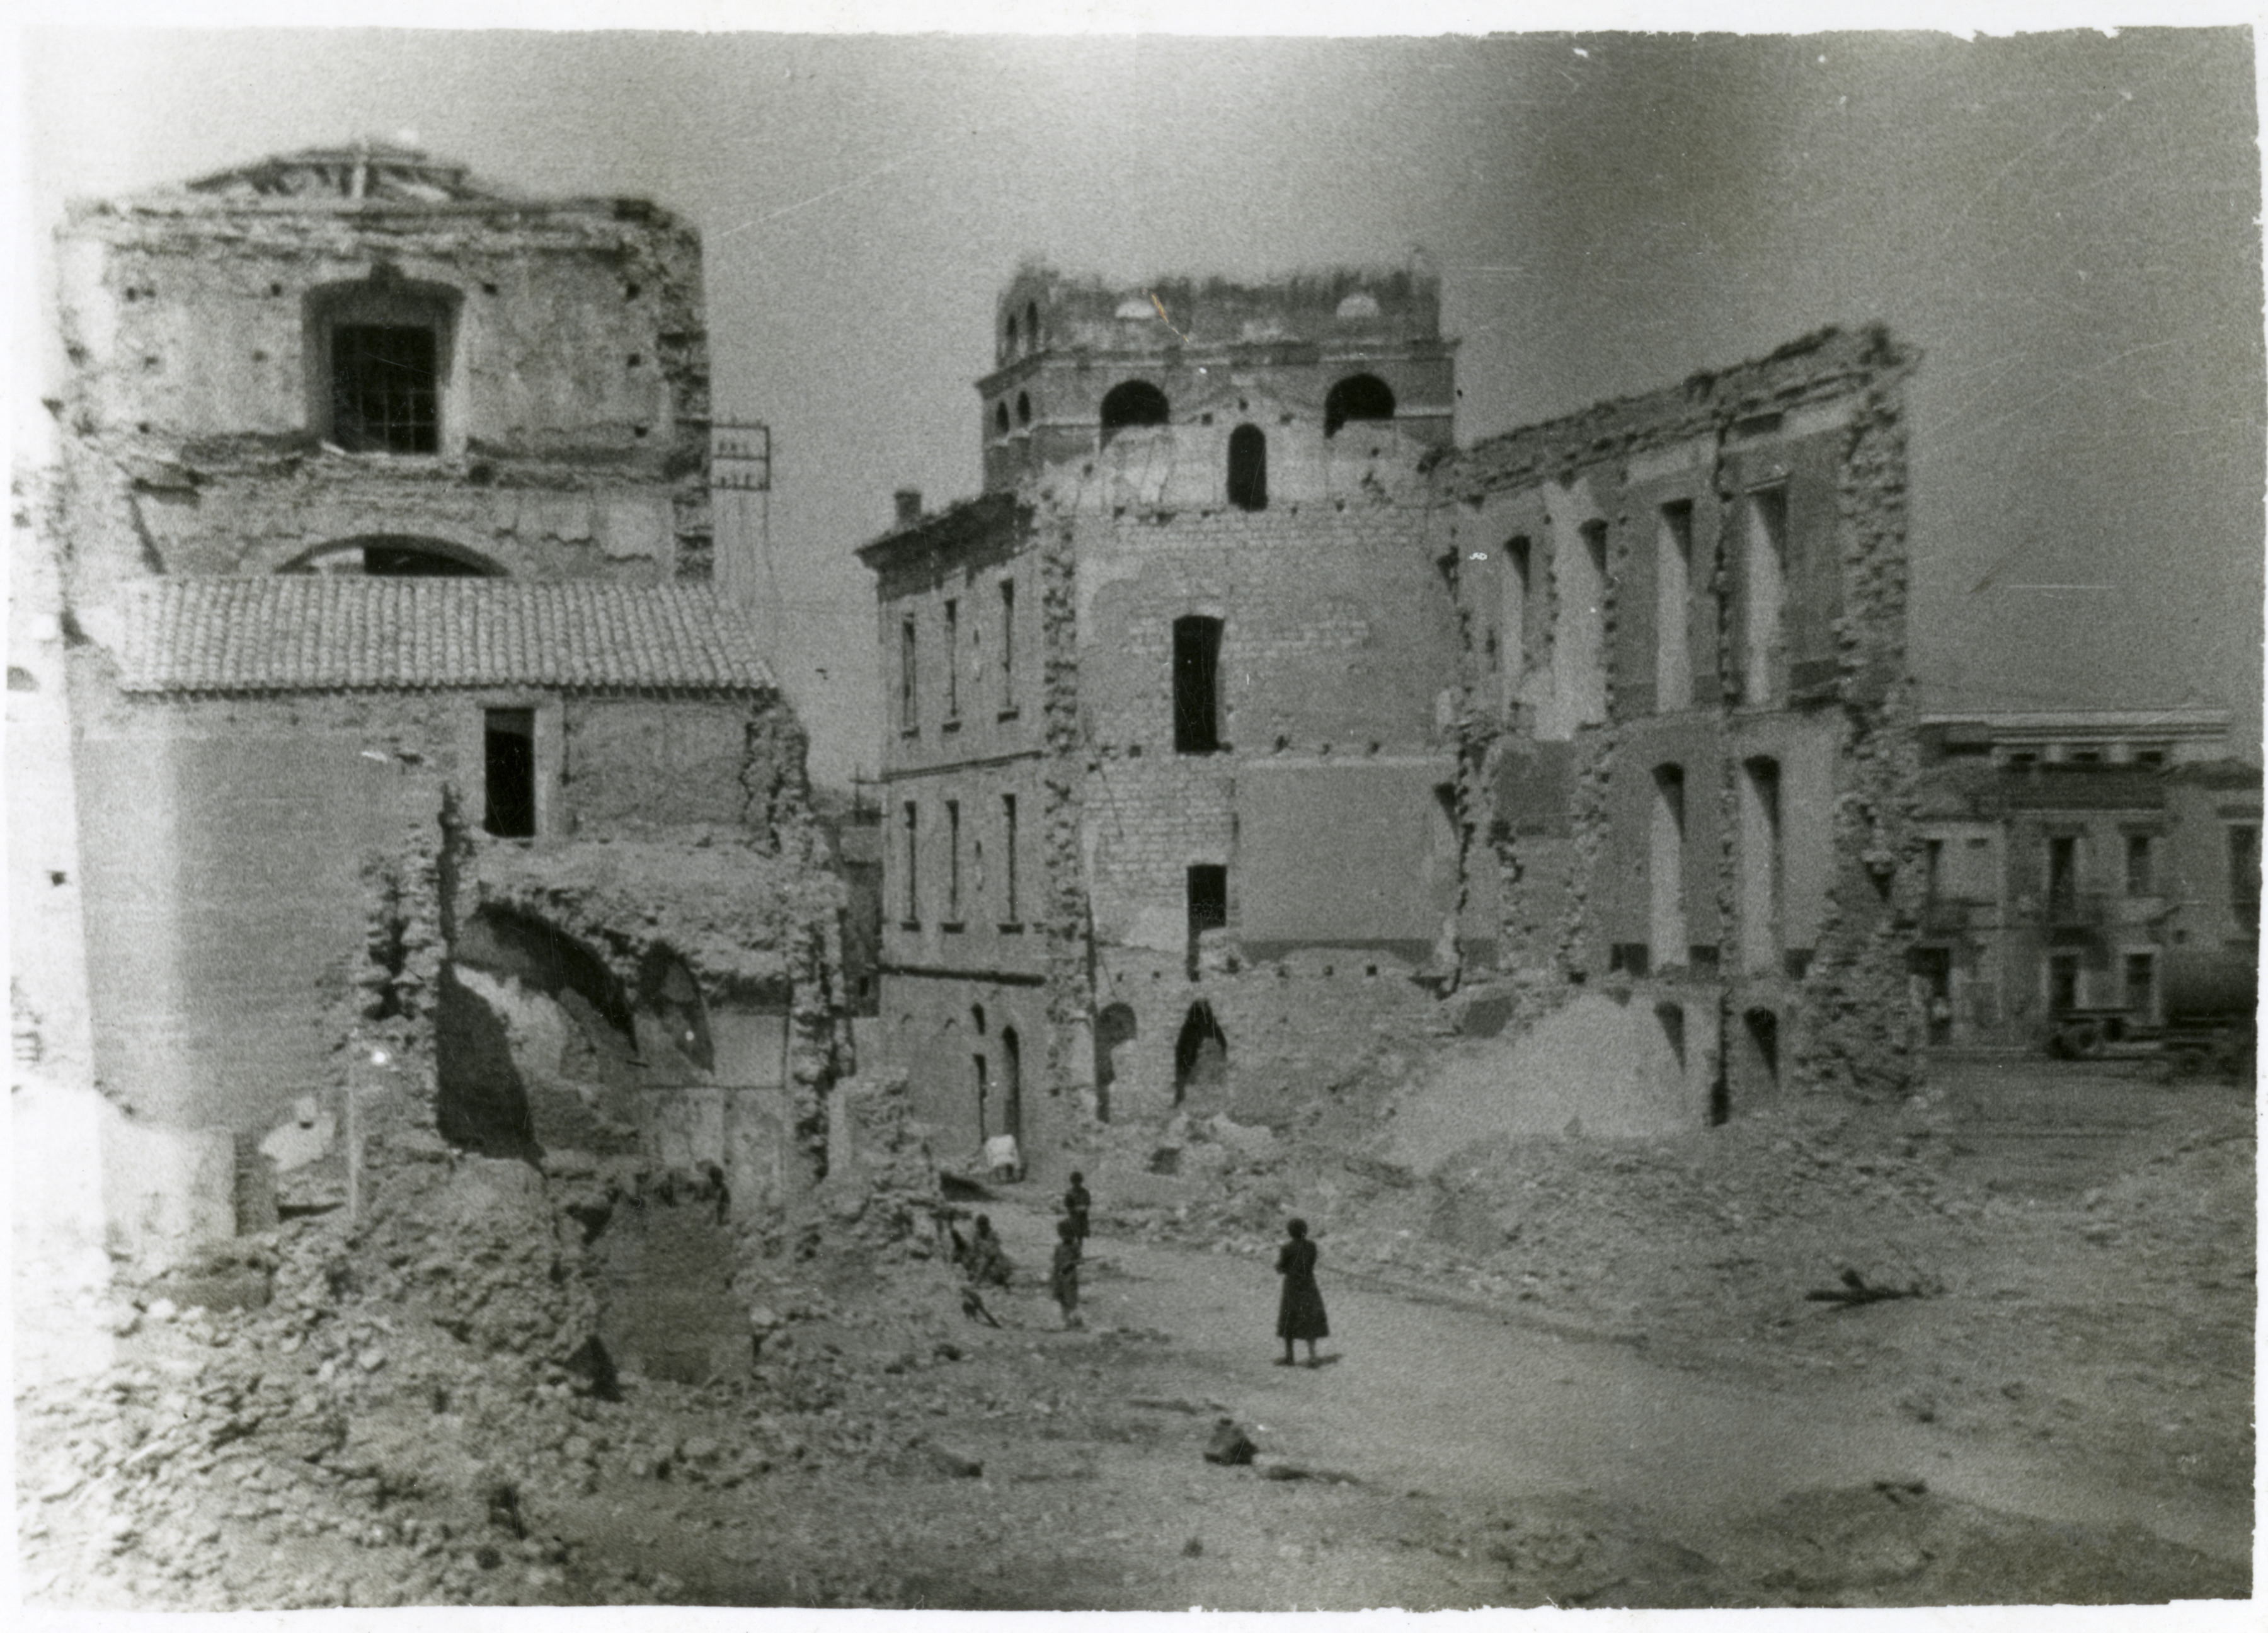 Heavily bomb damaged buildings in Italy in 1944 | The Digital ...